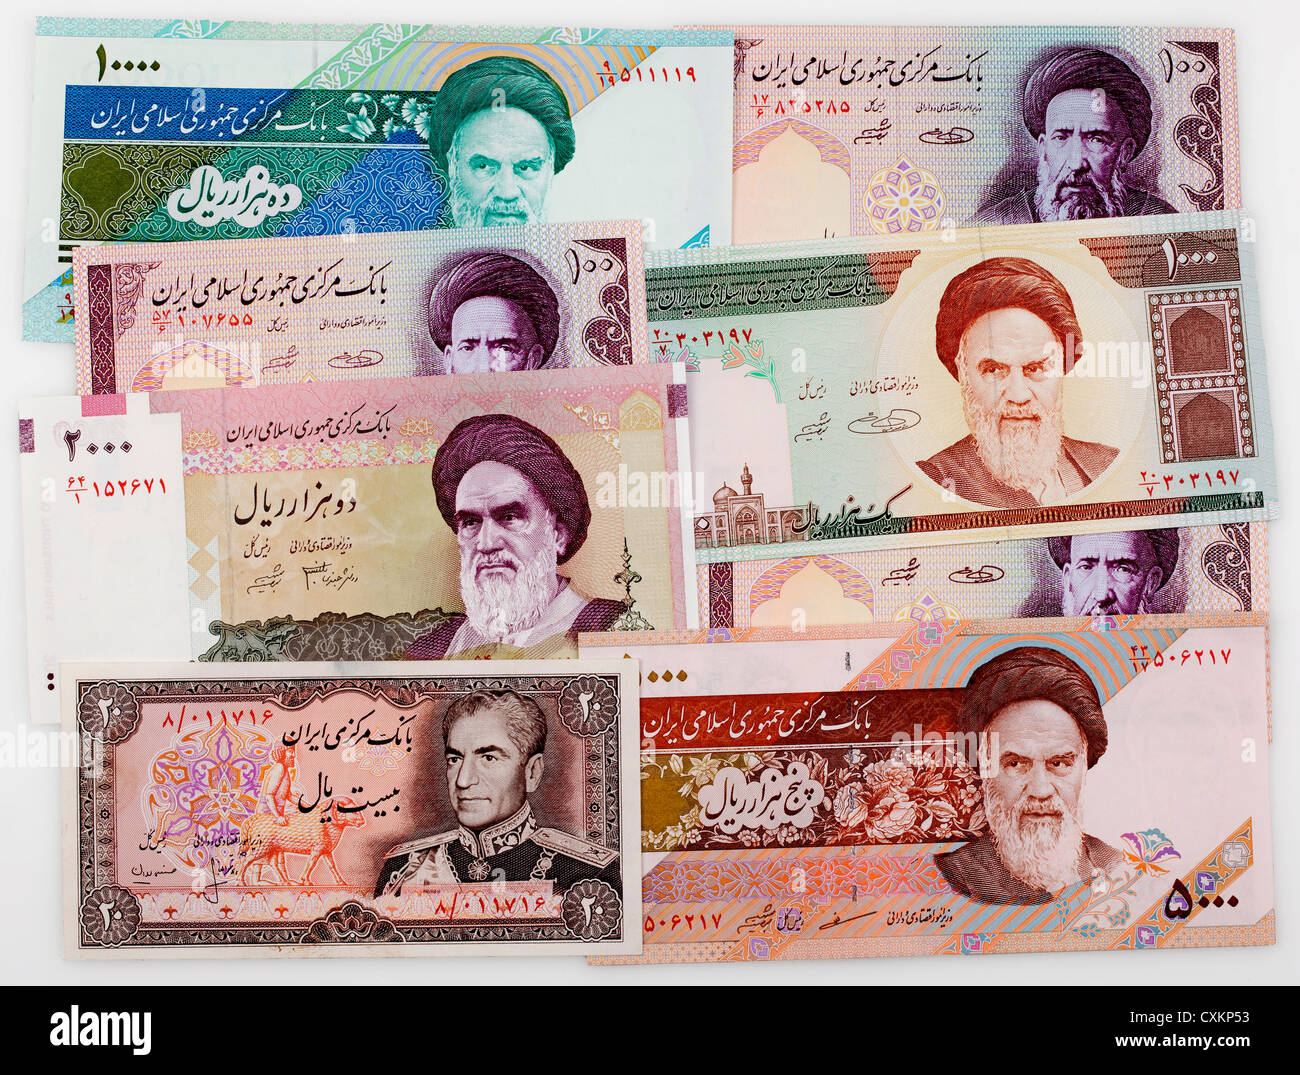 Historic Bank Notes From Iran With Portraits Of Shah Mohammad Reza Stock Photo Alamy